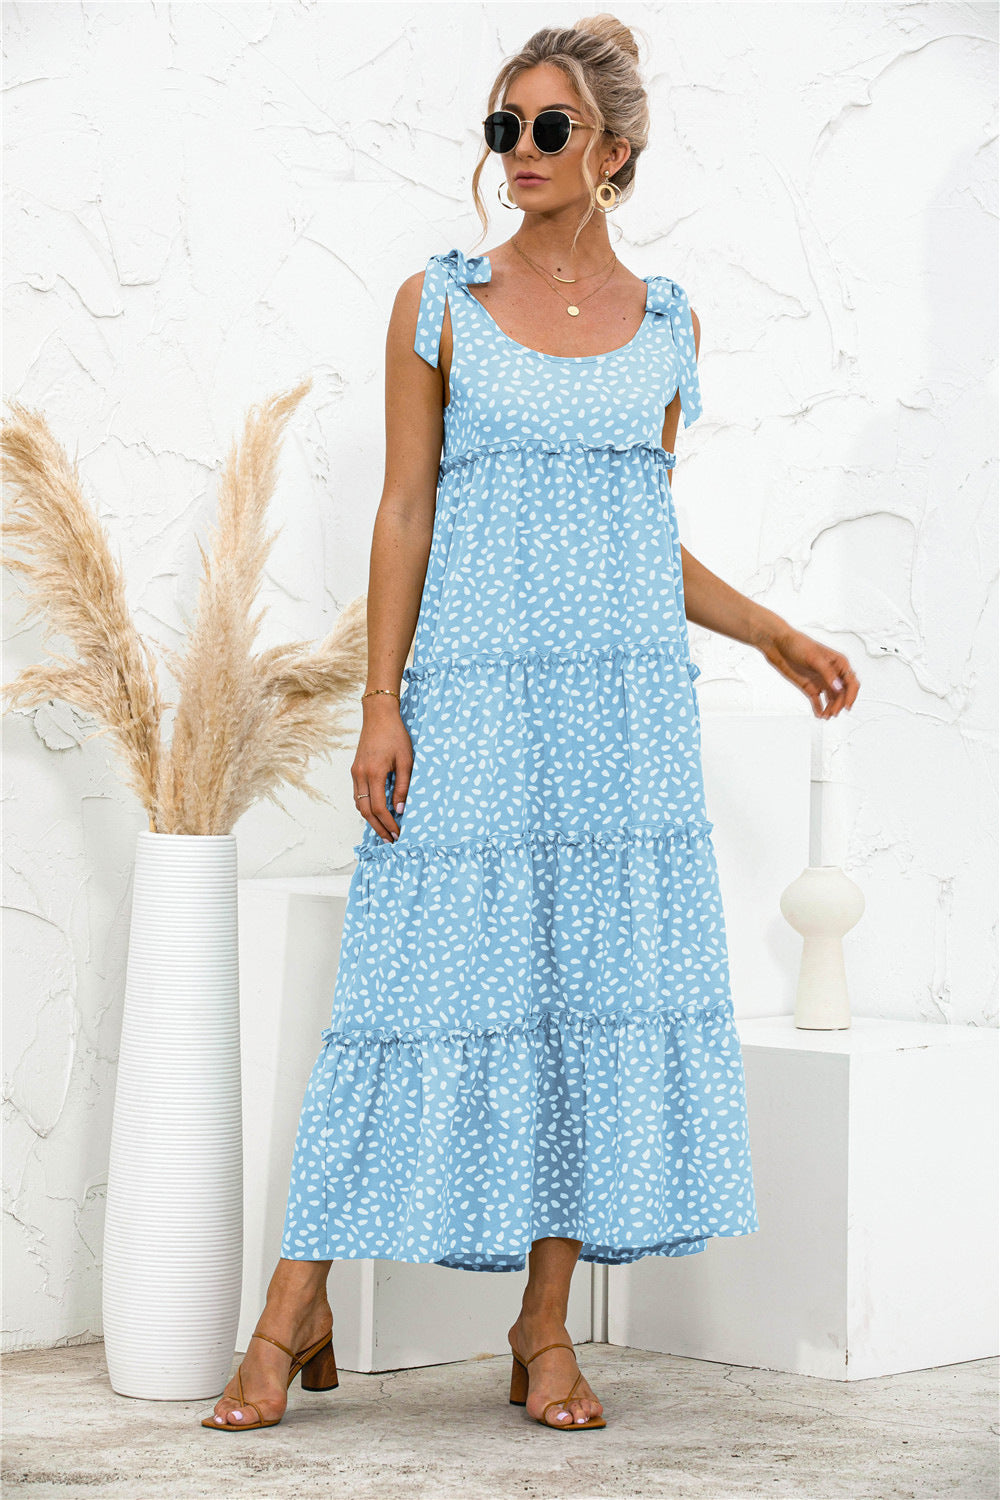 Summer Popular Style With Dots Stitching Dresses